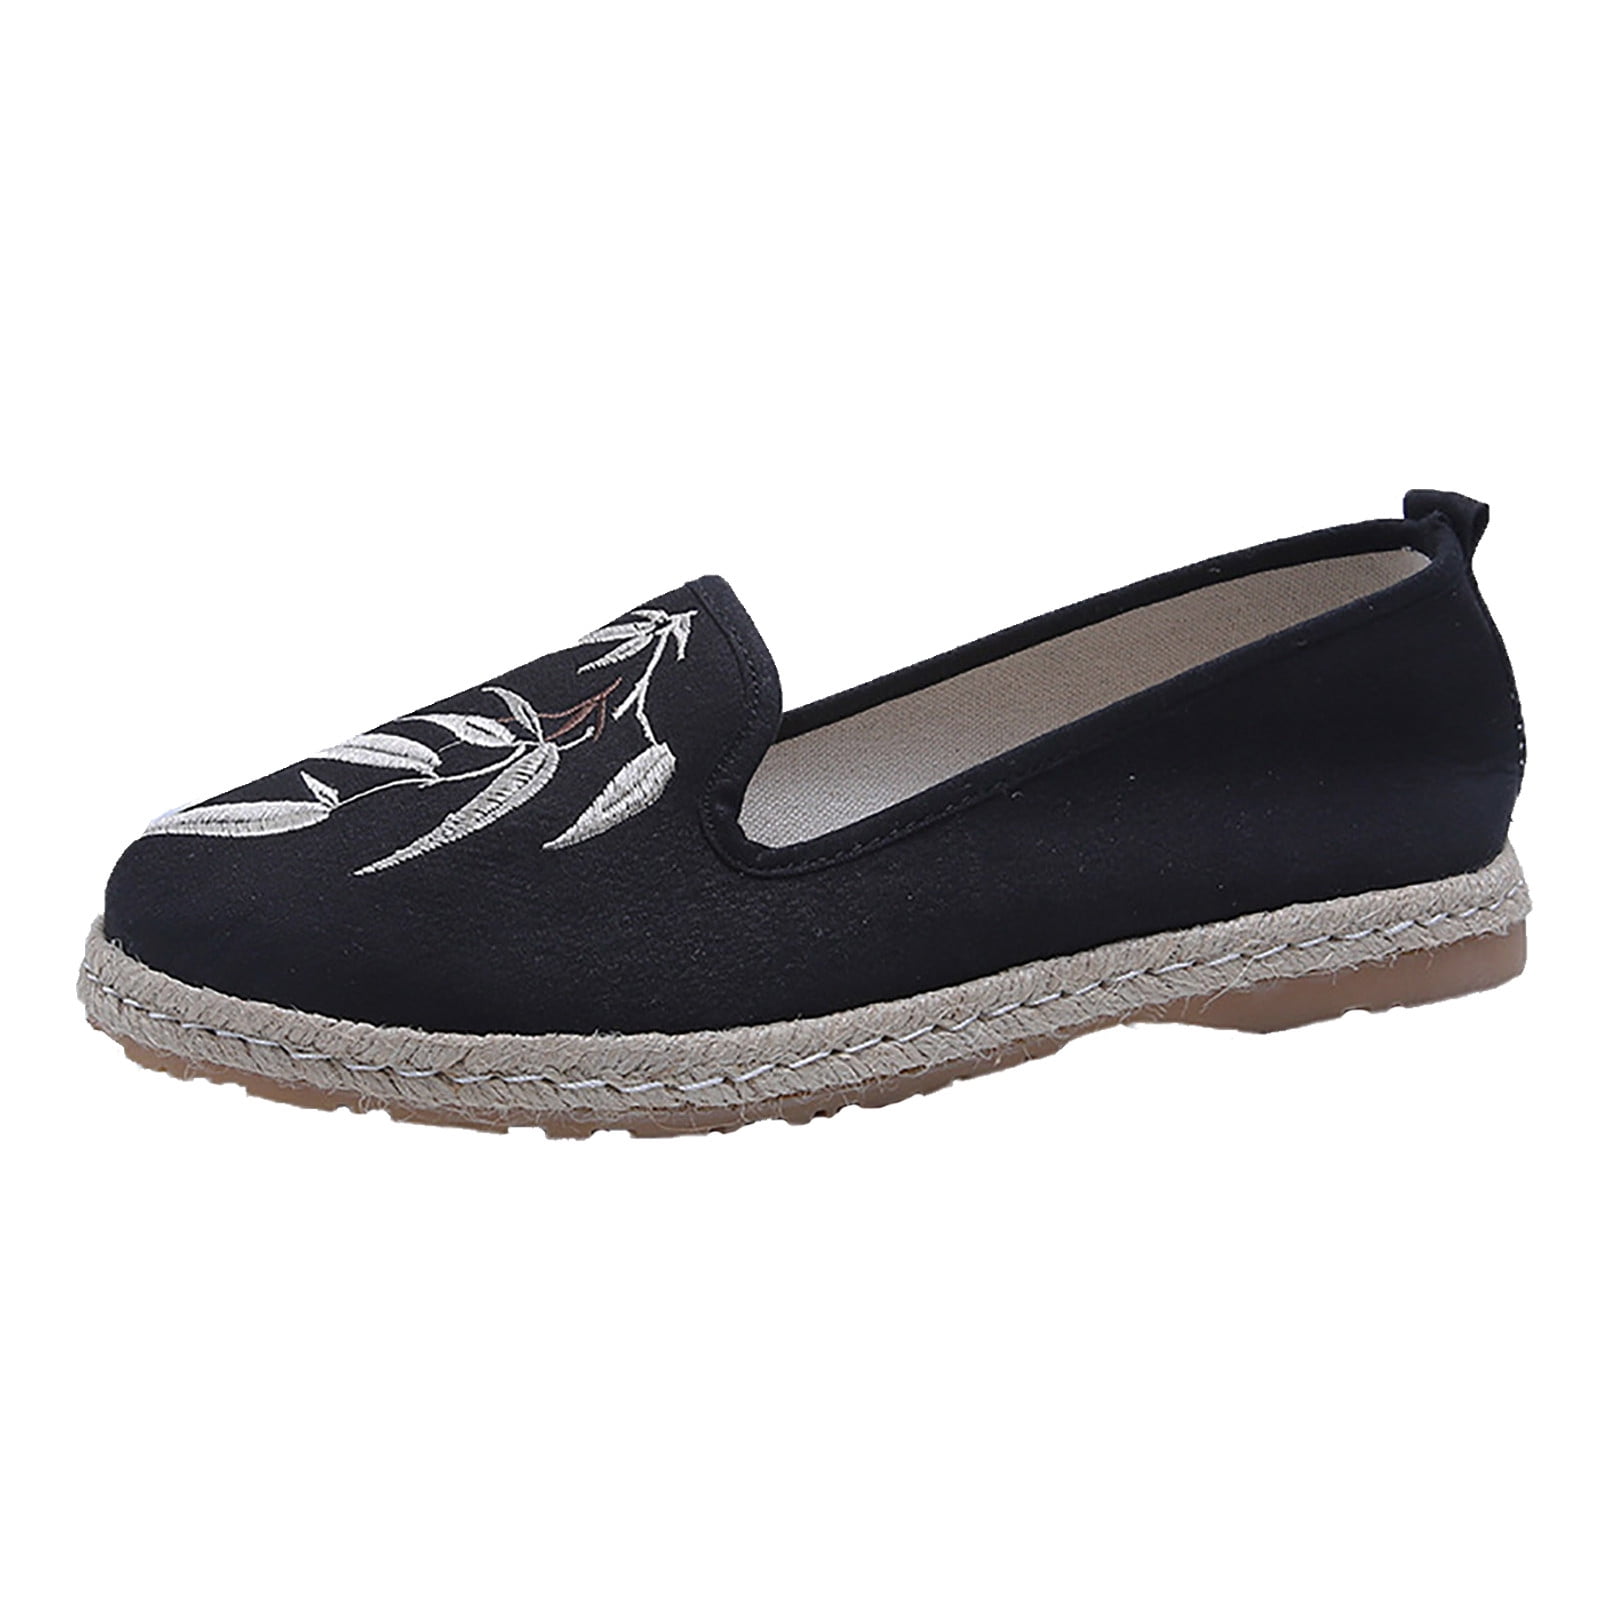 Fashionable Soft-sole Embroidered Round Toe Slip-on Flat Espadrille Shoes  For Spring And Autumn